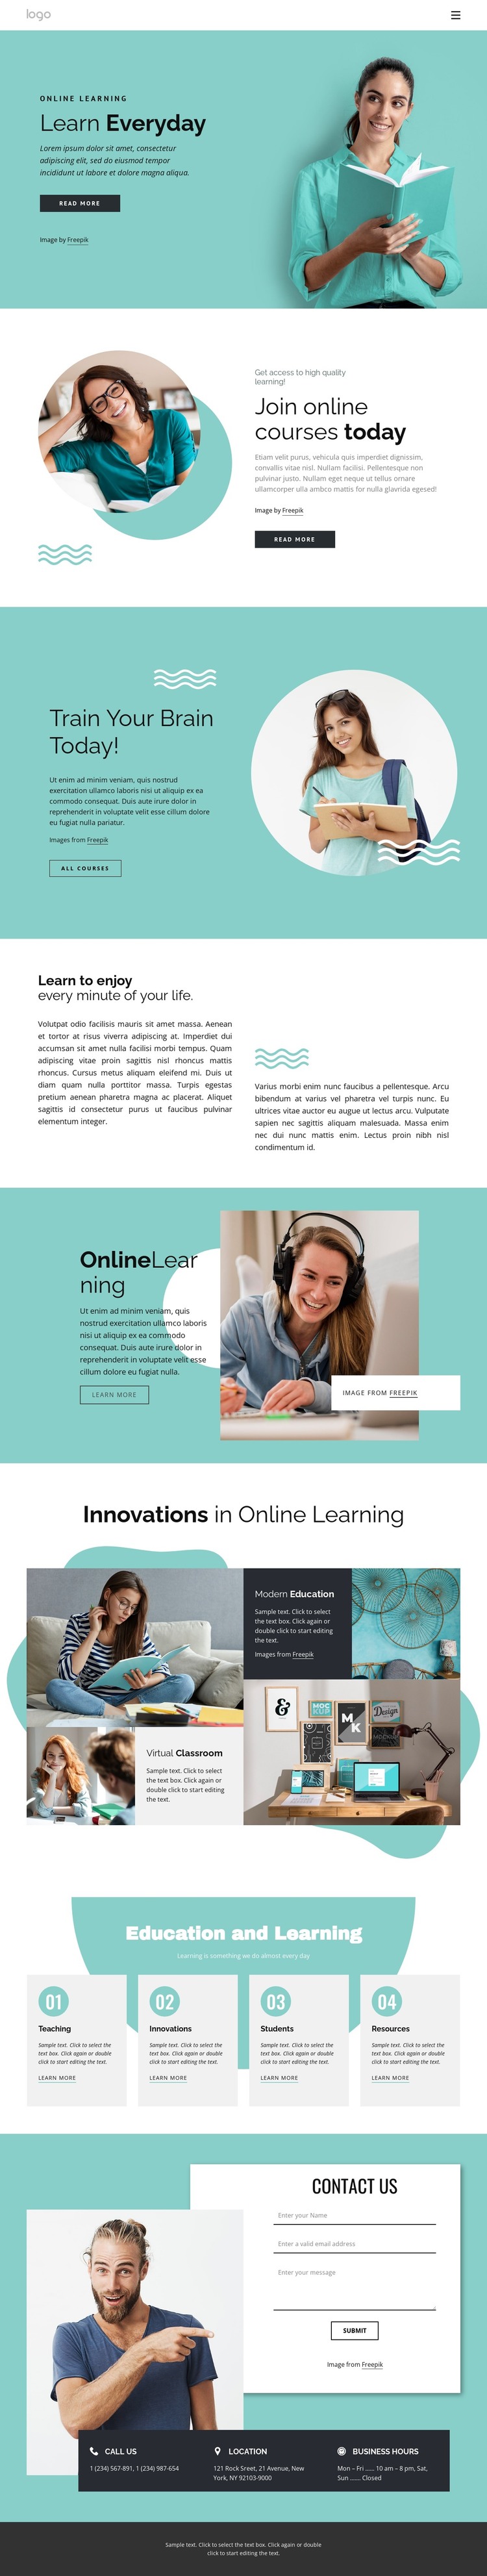 Learning is a lifelong process HTML Template